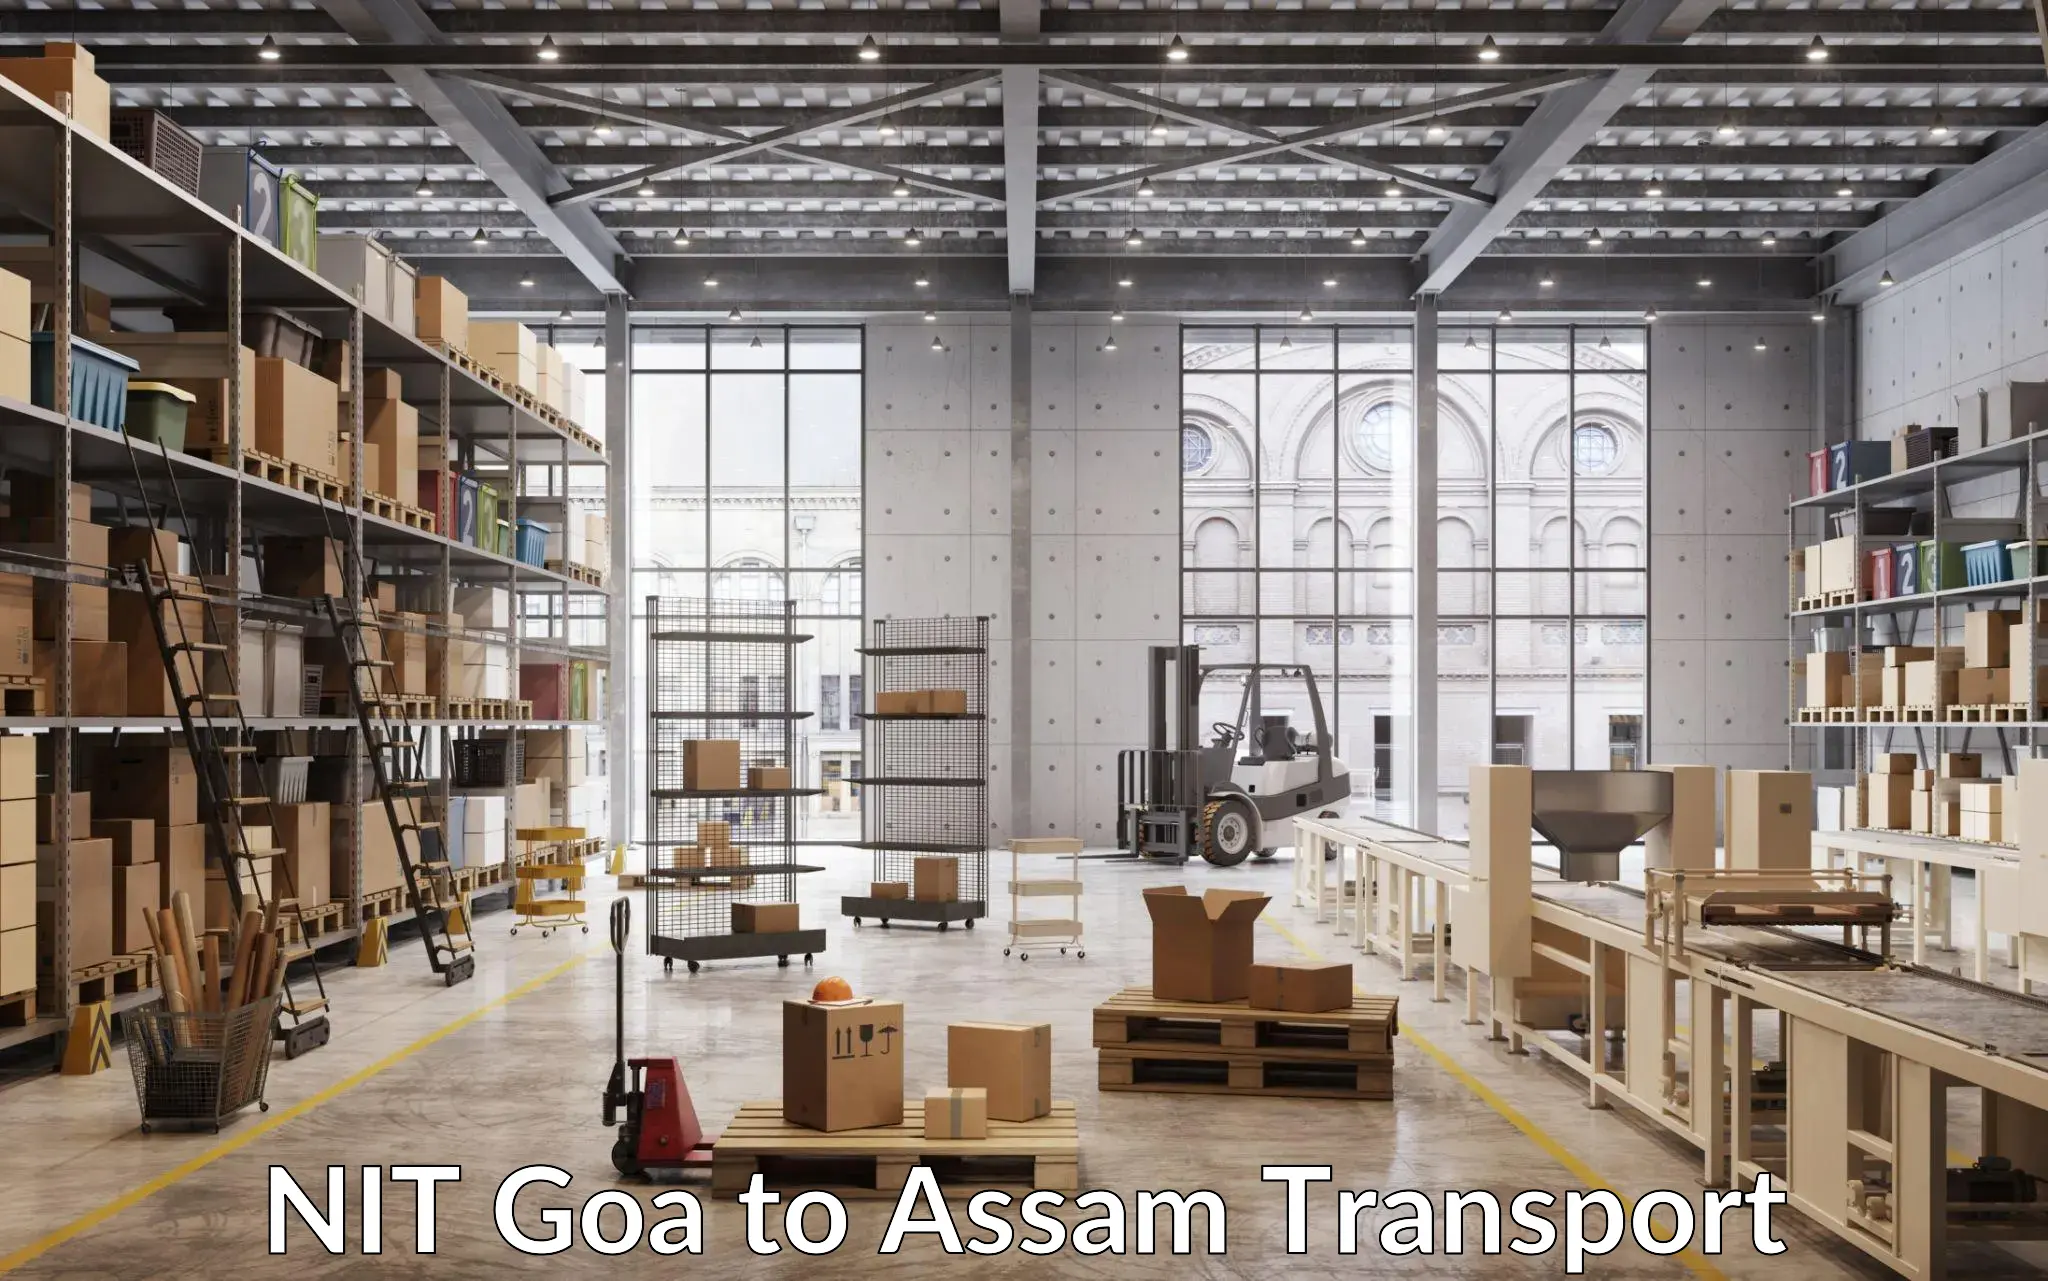 Container transport service NIT Goa to Dhupdhara